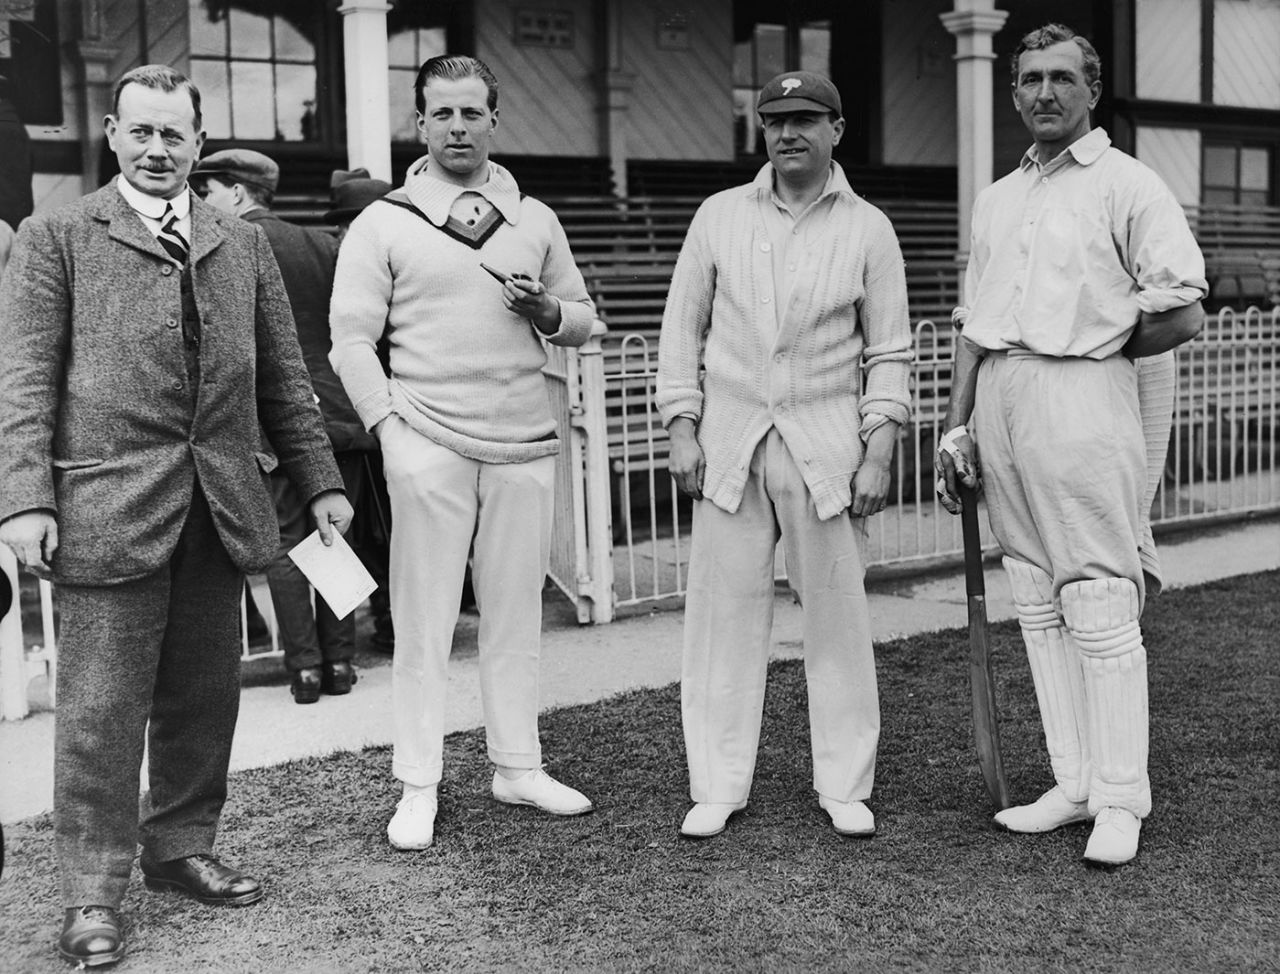 Lionel Tennyson (second from left) and CB Fry (fourth from left) at a match, May 1921